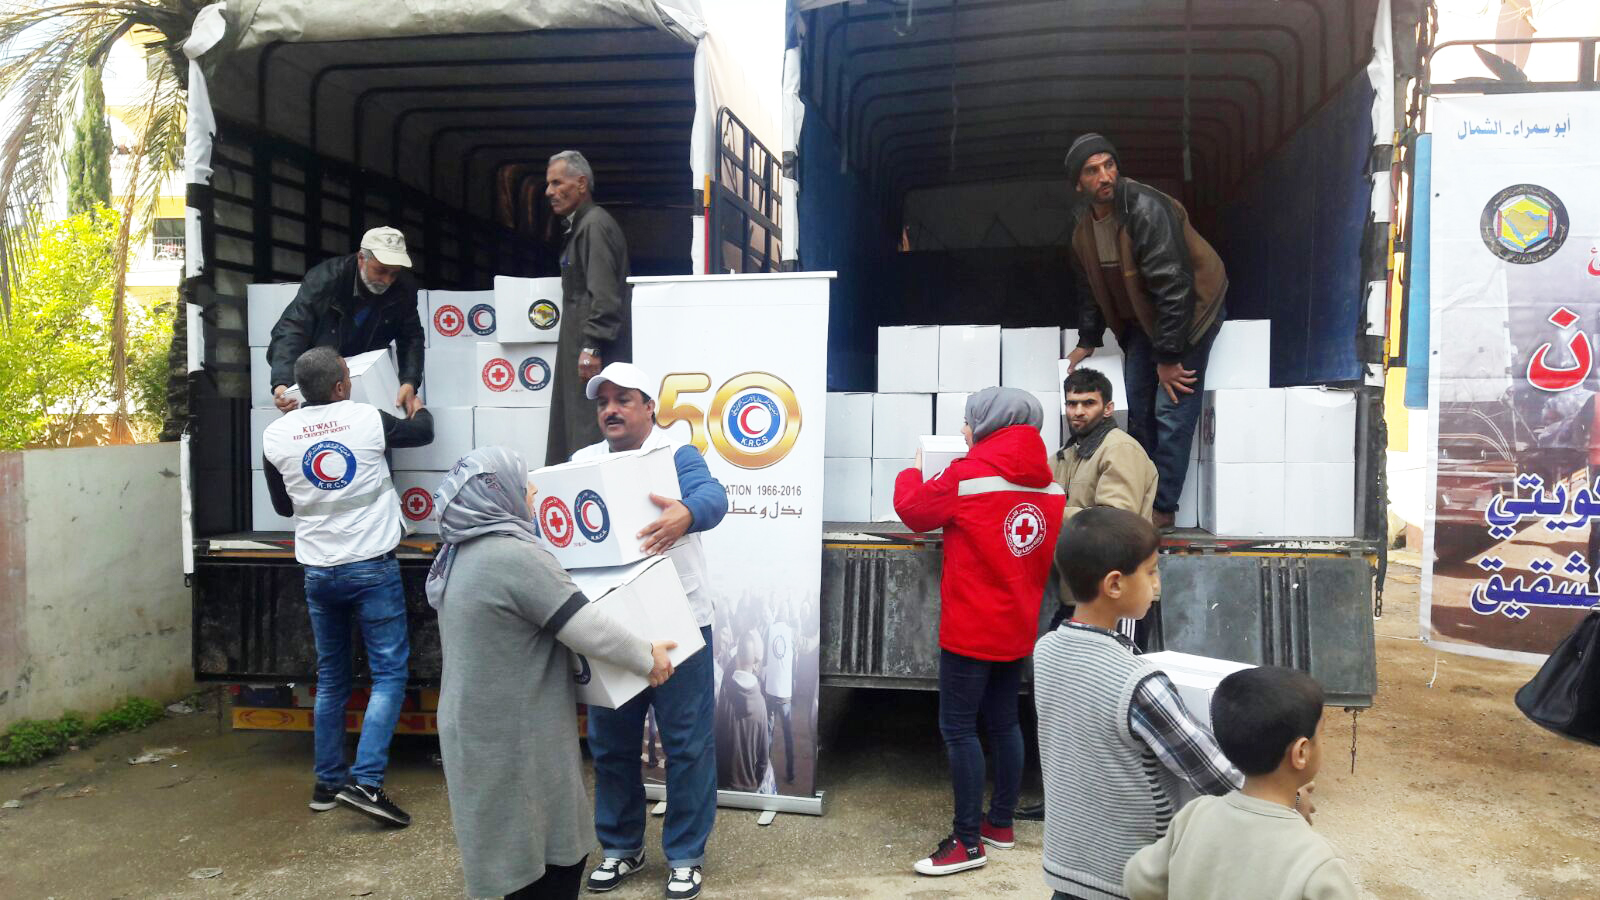 Kuwait Red Crescent Society (KRCS) delivering aid parcels to Syrian refugees in northern Lebanon